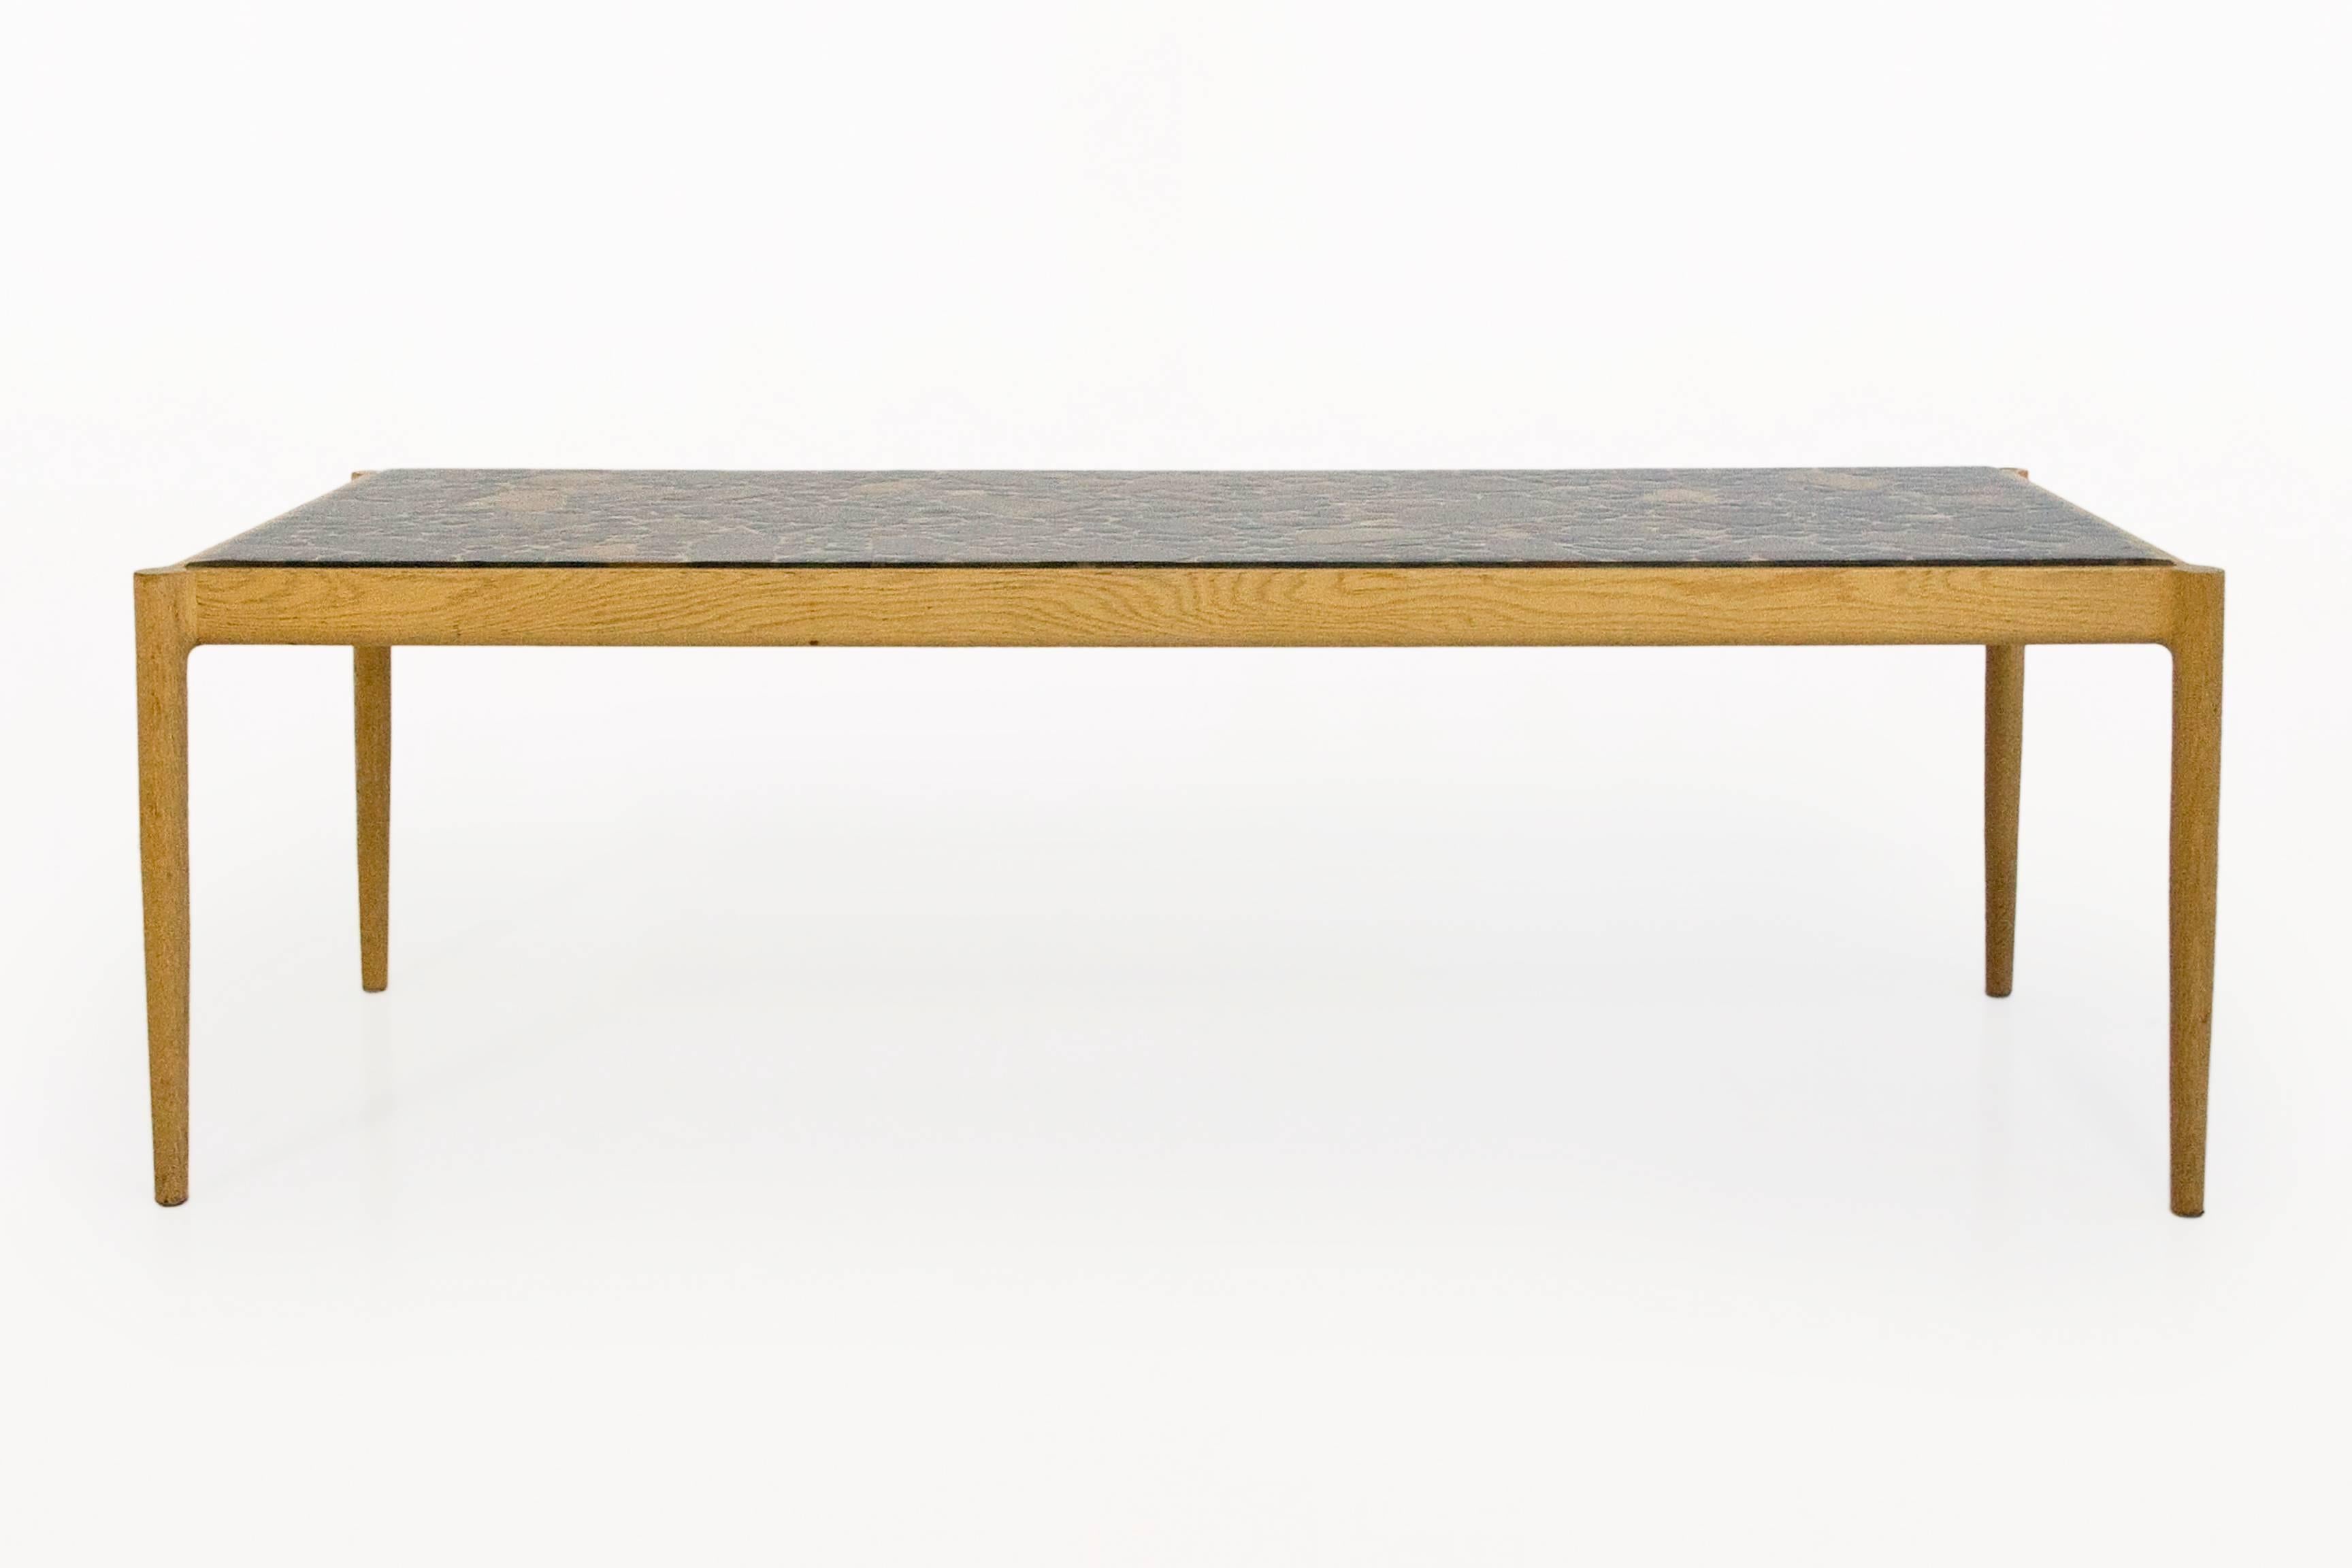 IB Kofod-Larsen (1921-2003)  coffee table by Seffle Möbelfabrik,
coffee table in elm with resin and stone top, stamped,
with pebbles inclusions, edited by AB Seffle,
circa 1960, Sweden.
Measures: Height 48 cm, width 152 cm, depth 61 cm.